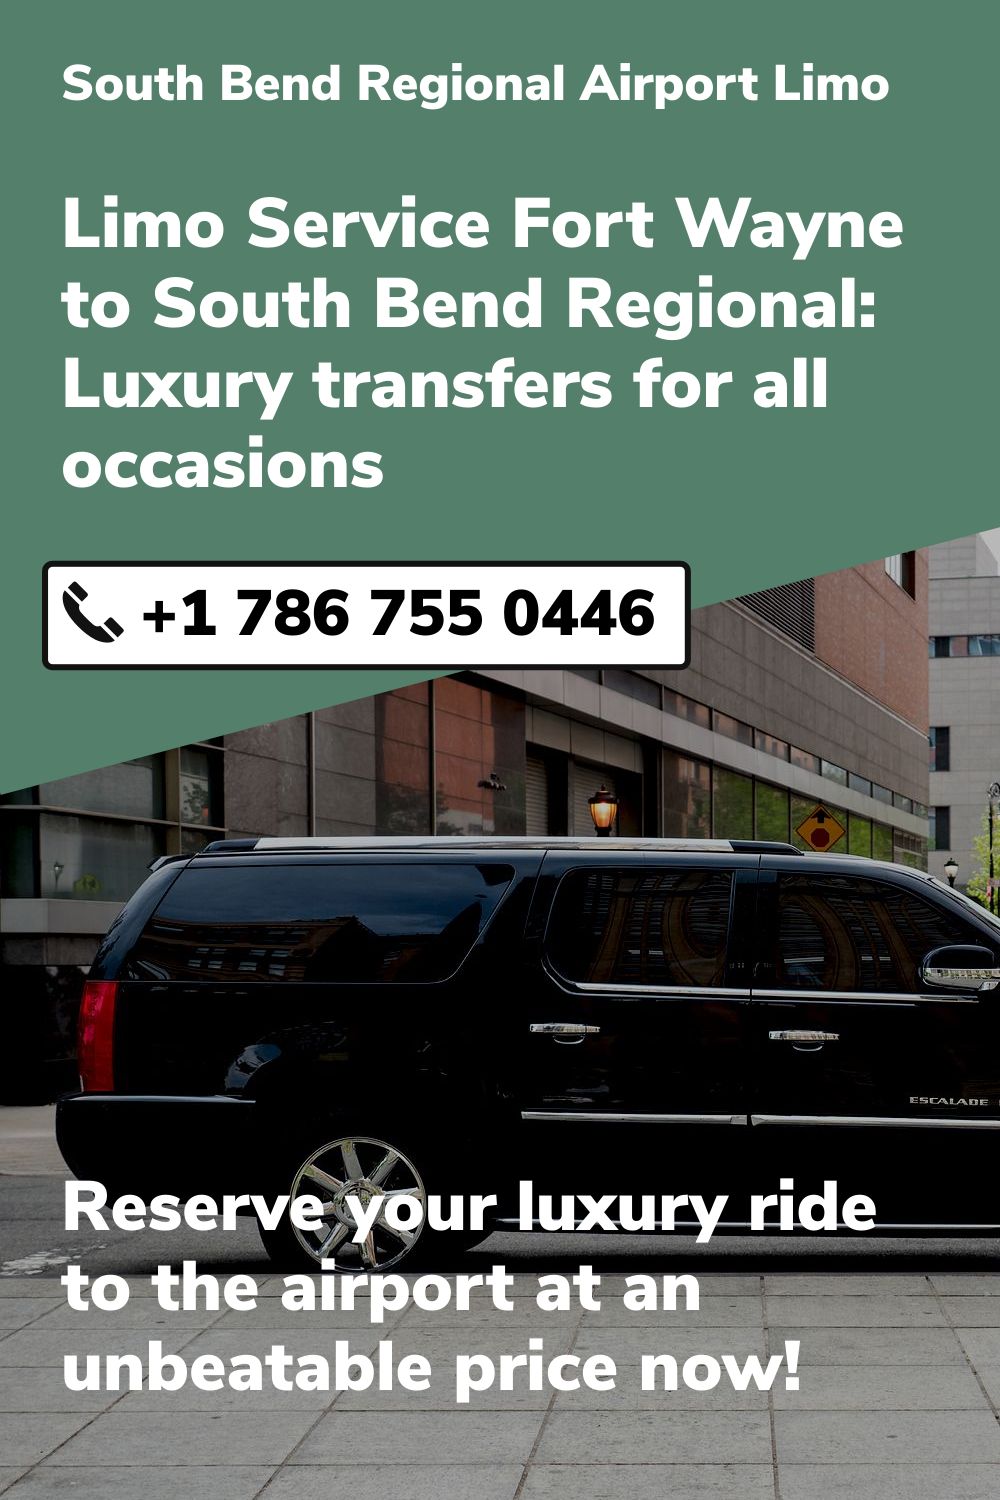 South Bend Regional Airport Limo